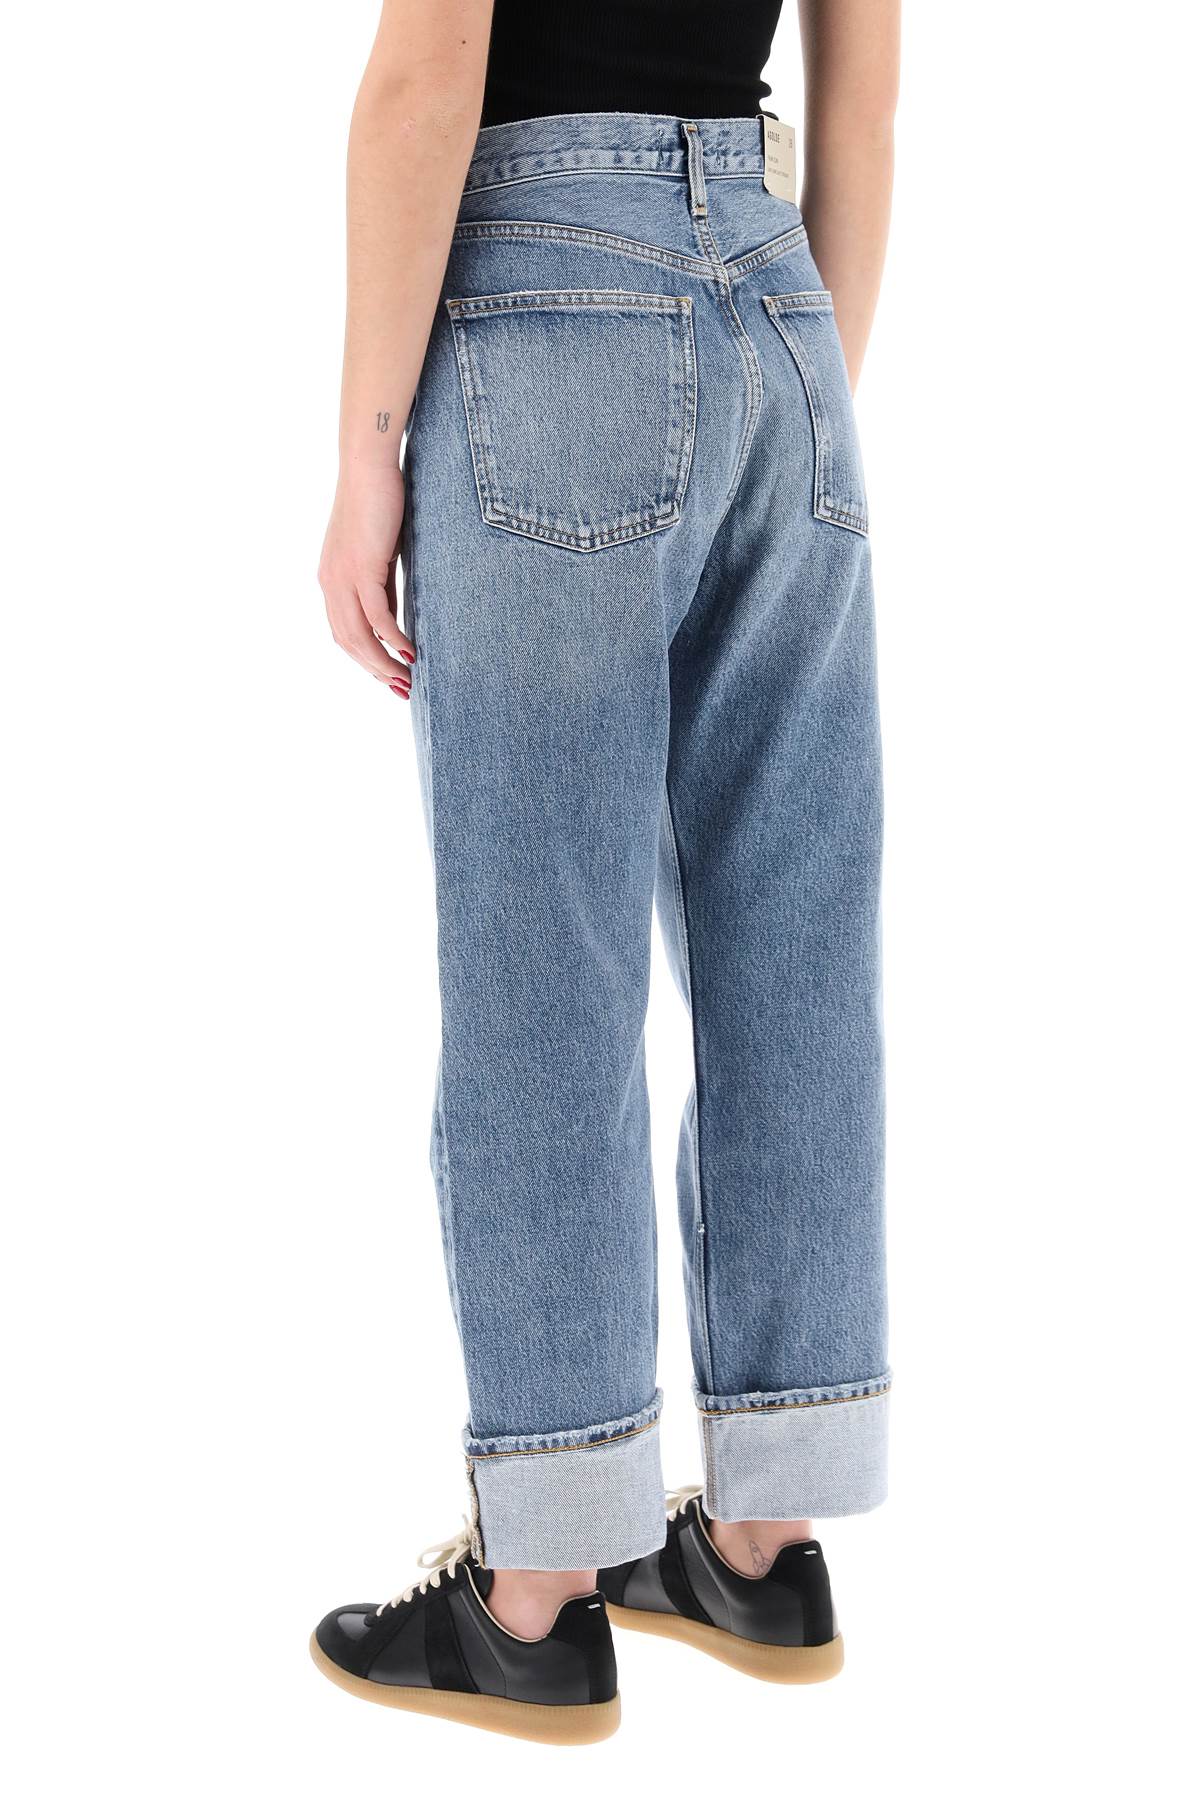 Agolde ca

straight jeans with low crotch fran-2